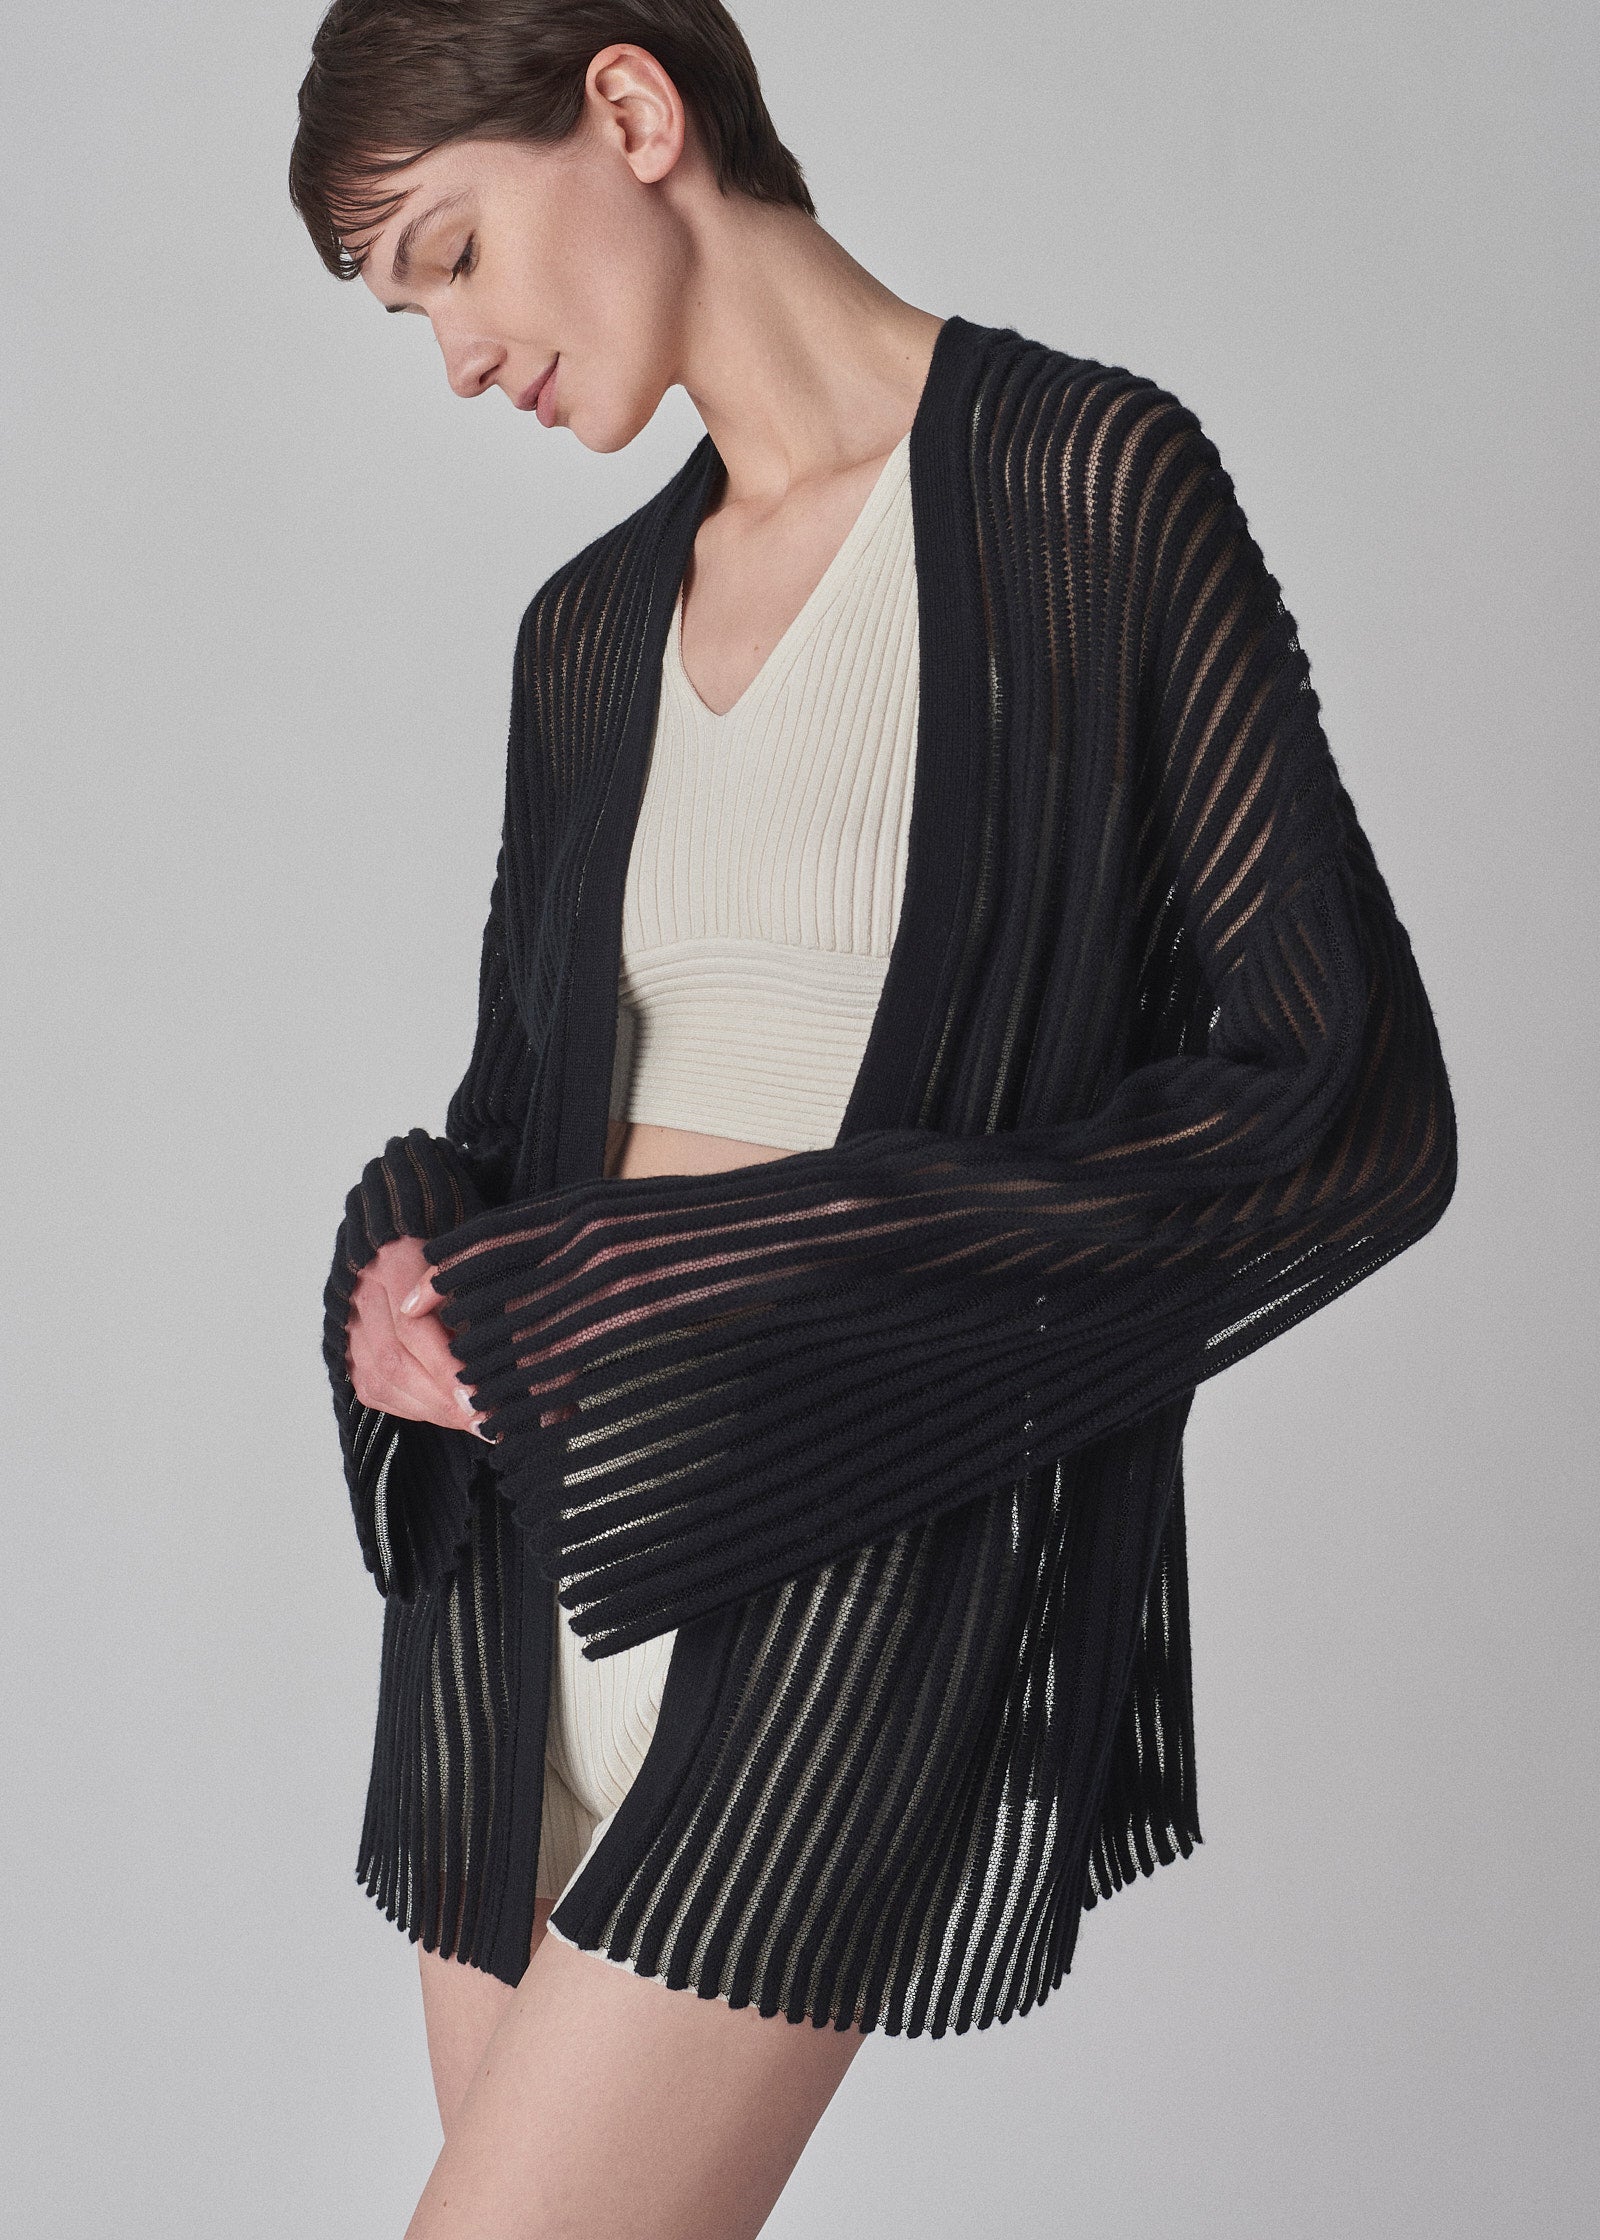 Cardigan in Cashmere Silk Knit- Black - CO Collections